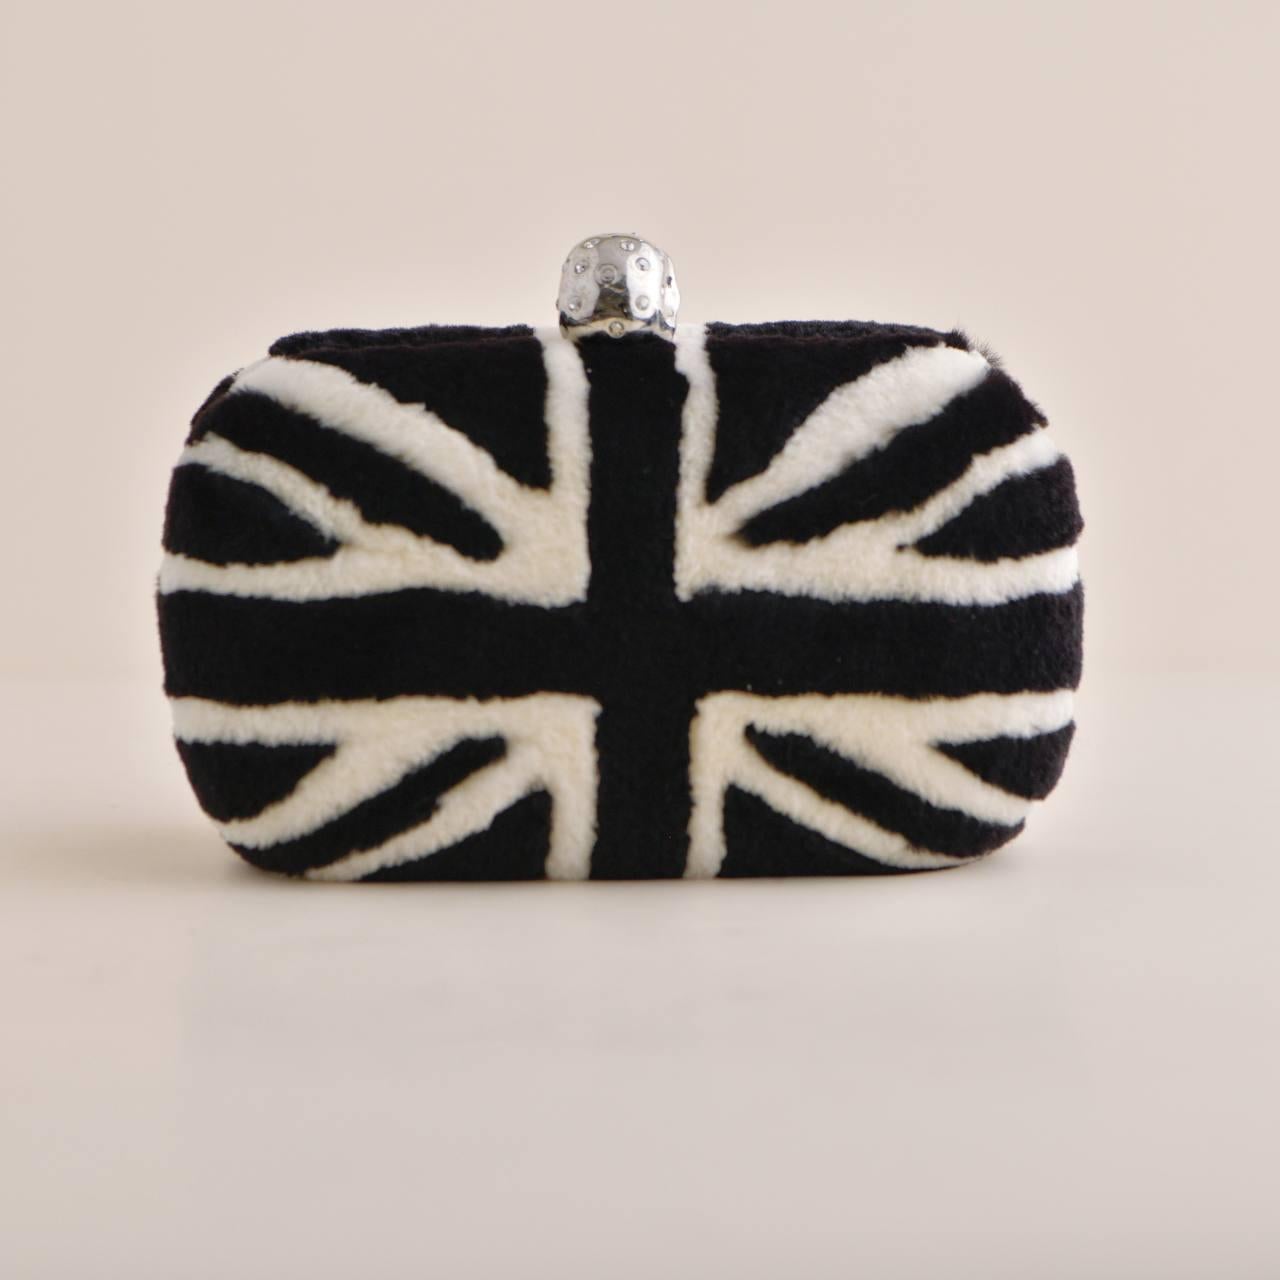 SKU	CT-2335
Model	Union Jack Skull Clutch
Condition	Excellent
Other Info	Height: 4.25